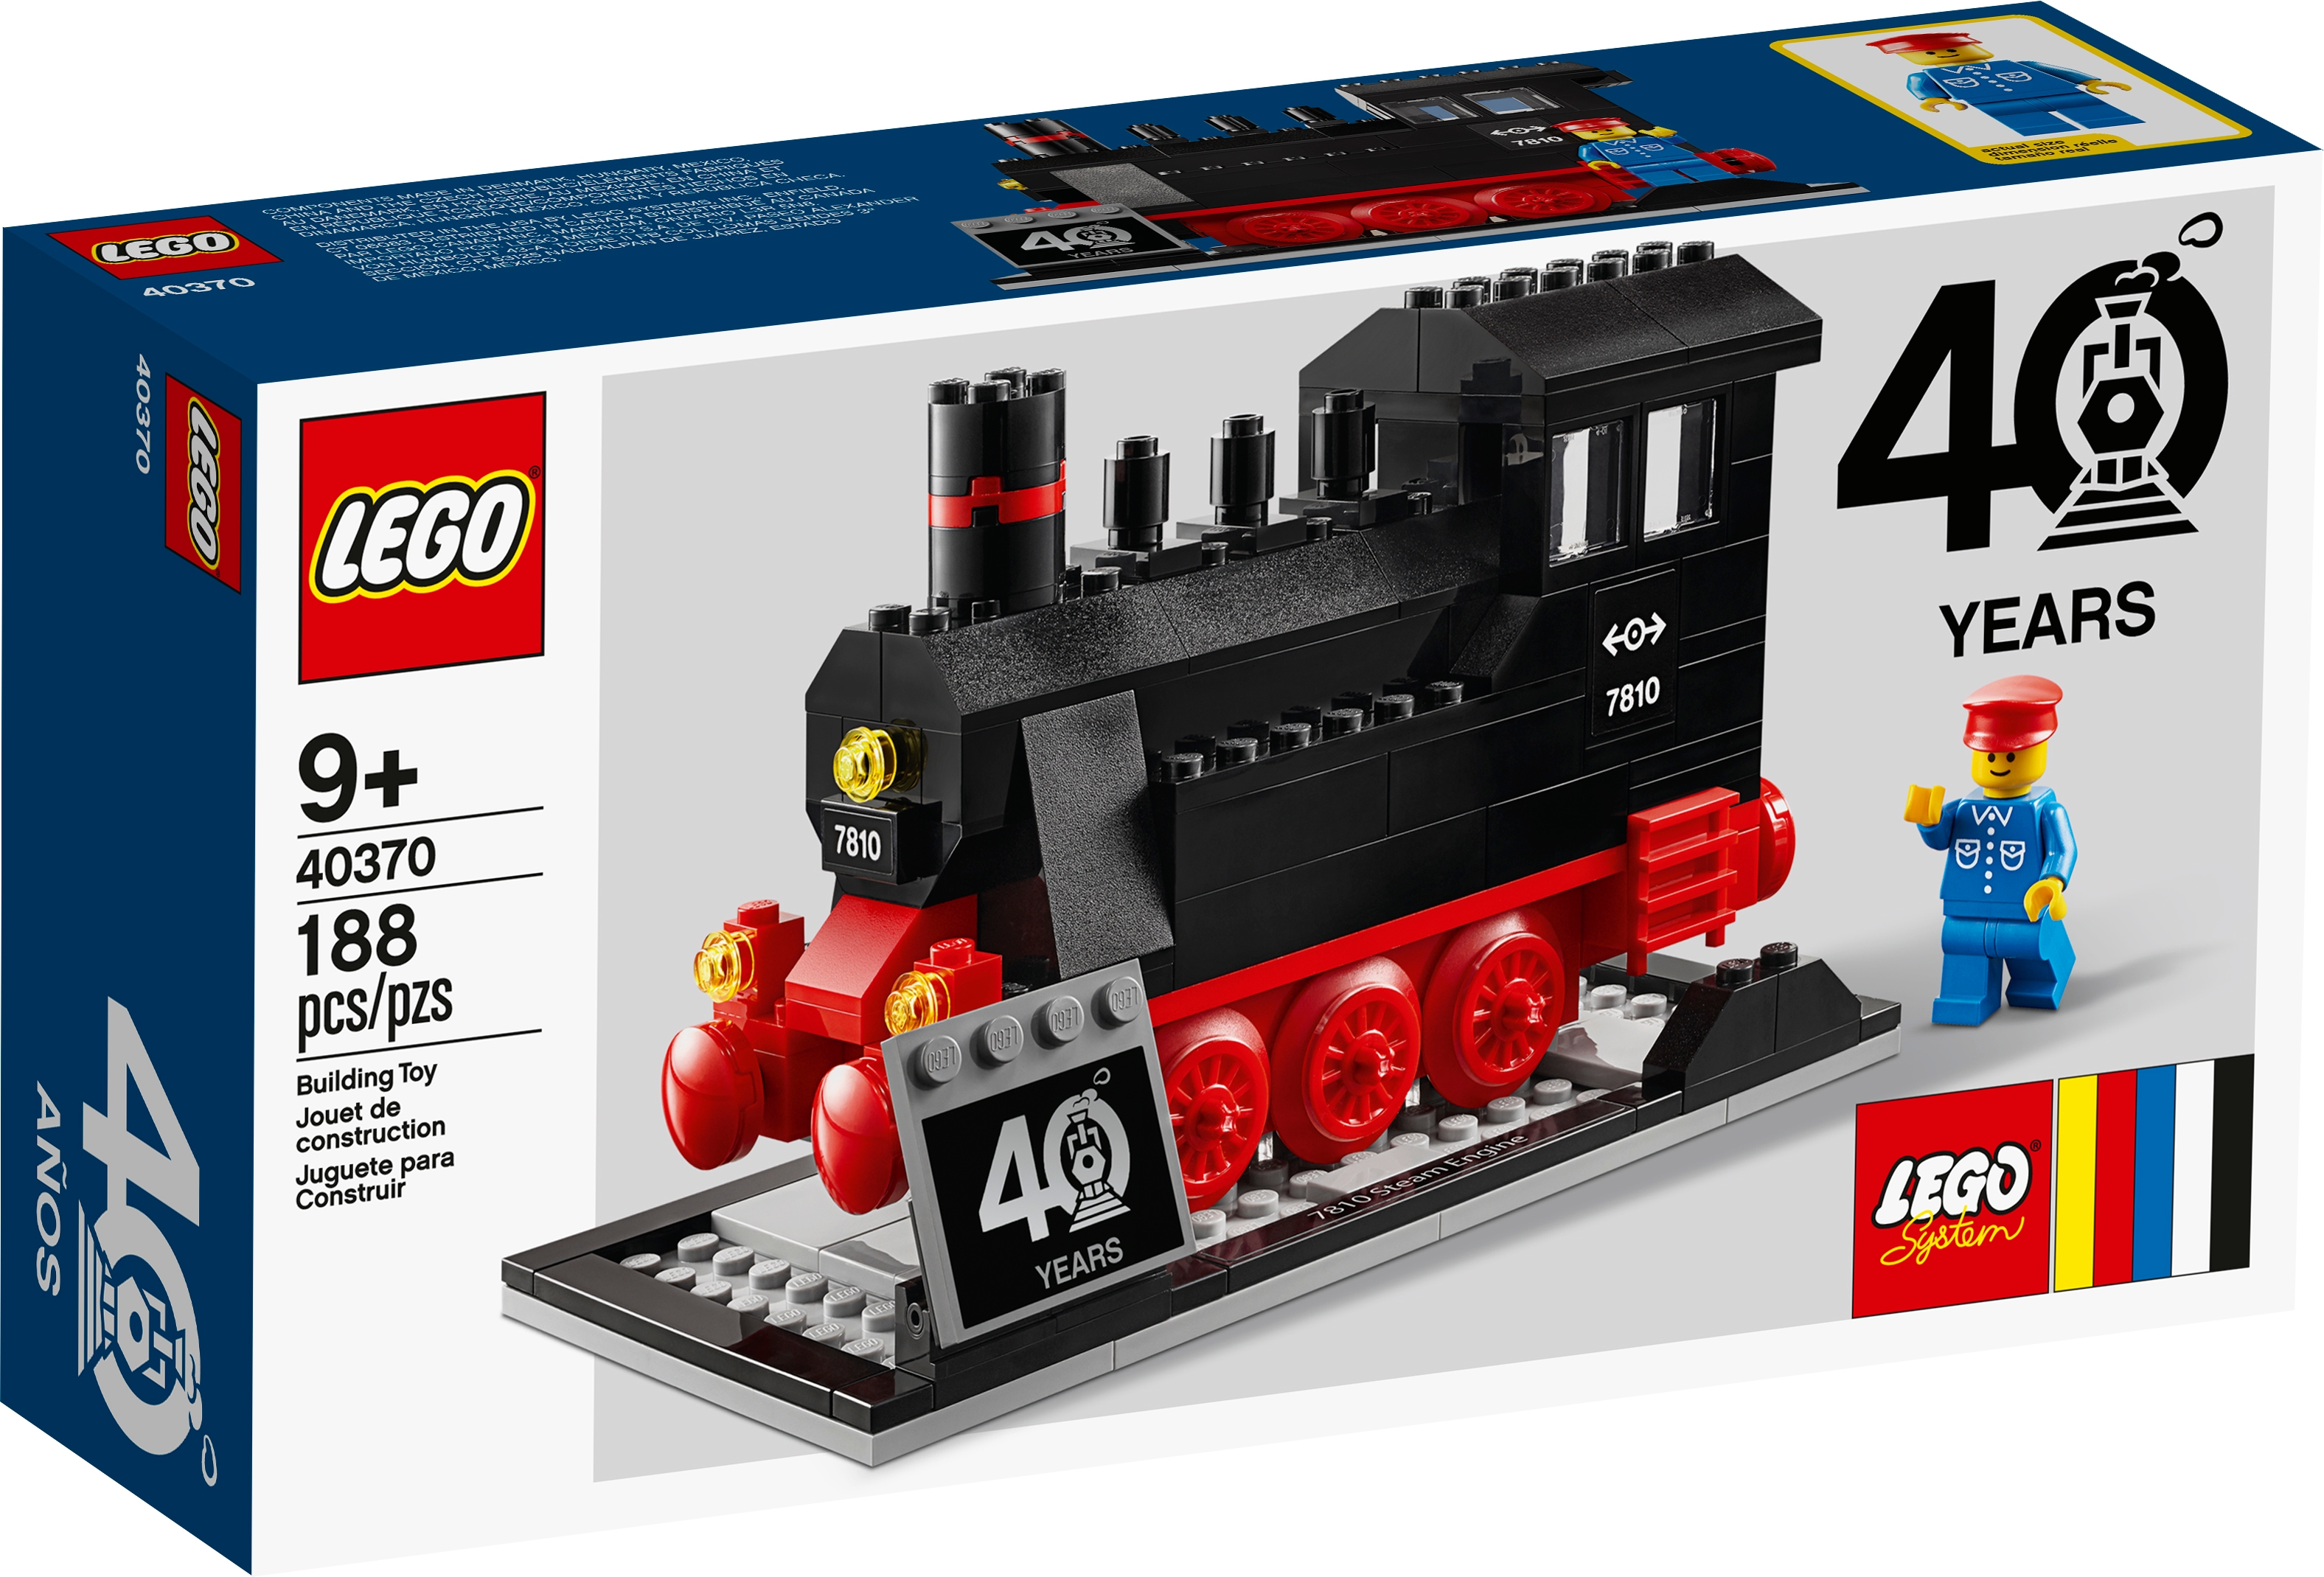 LEGO 40th Anniversary (40370) Available for Sale on LEGO Shop - The Brick Fan